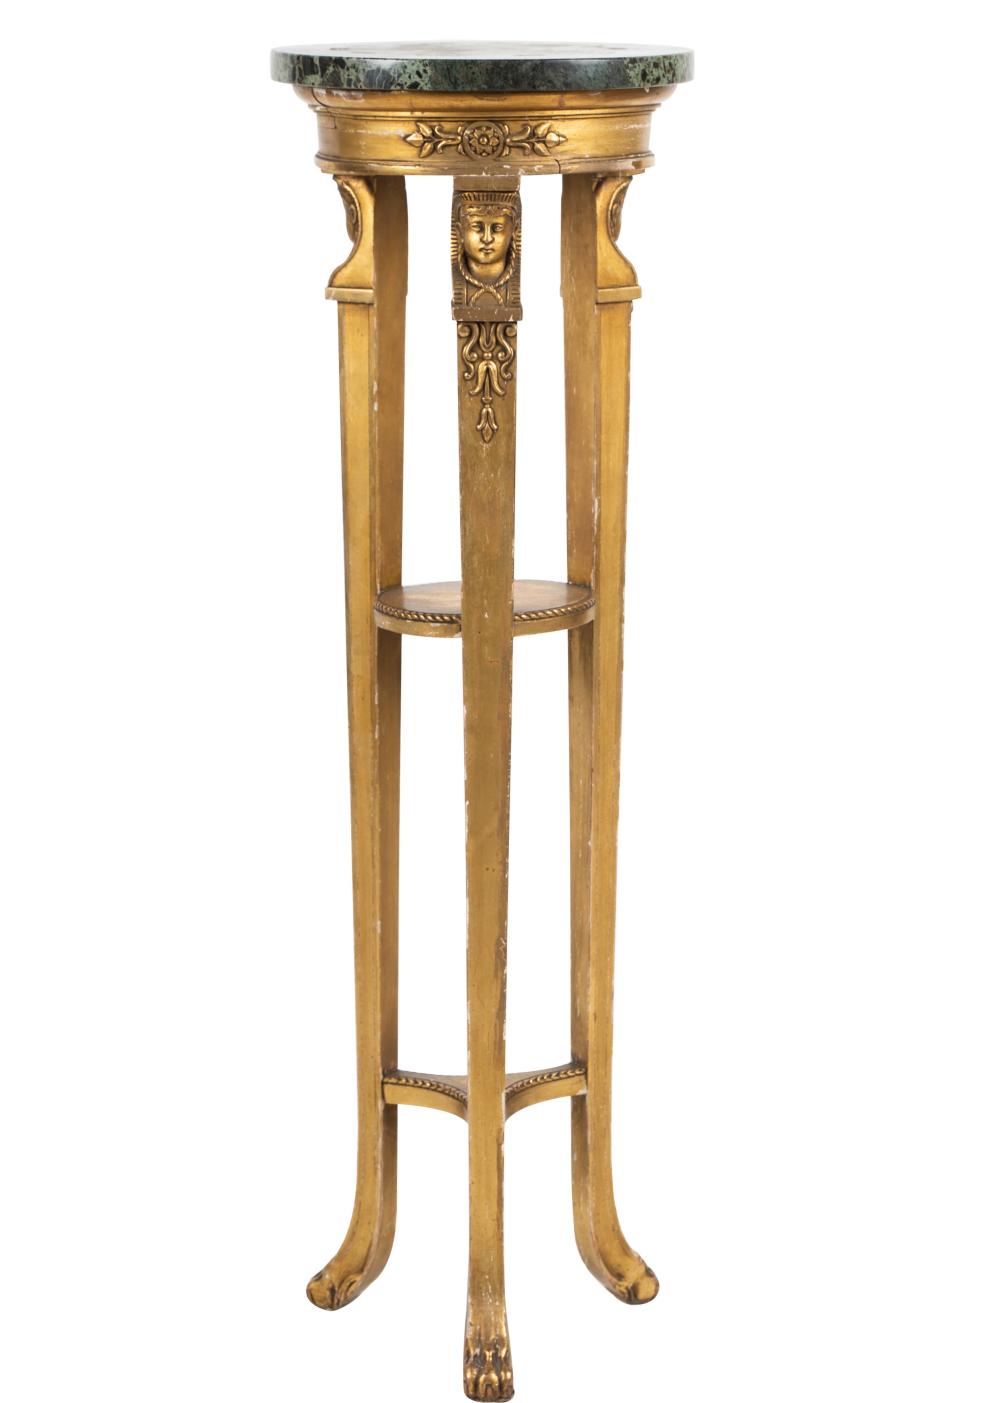 EMPIRE STYLE GILTWOOD PEDESTALwith 300982